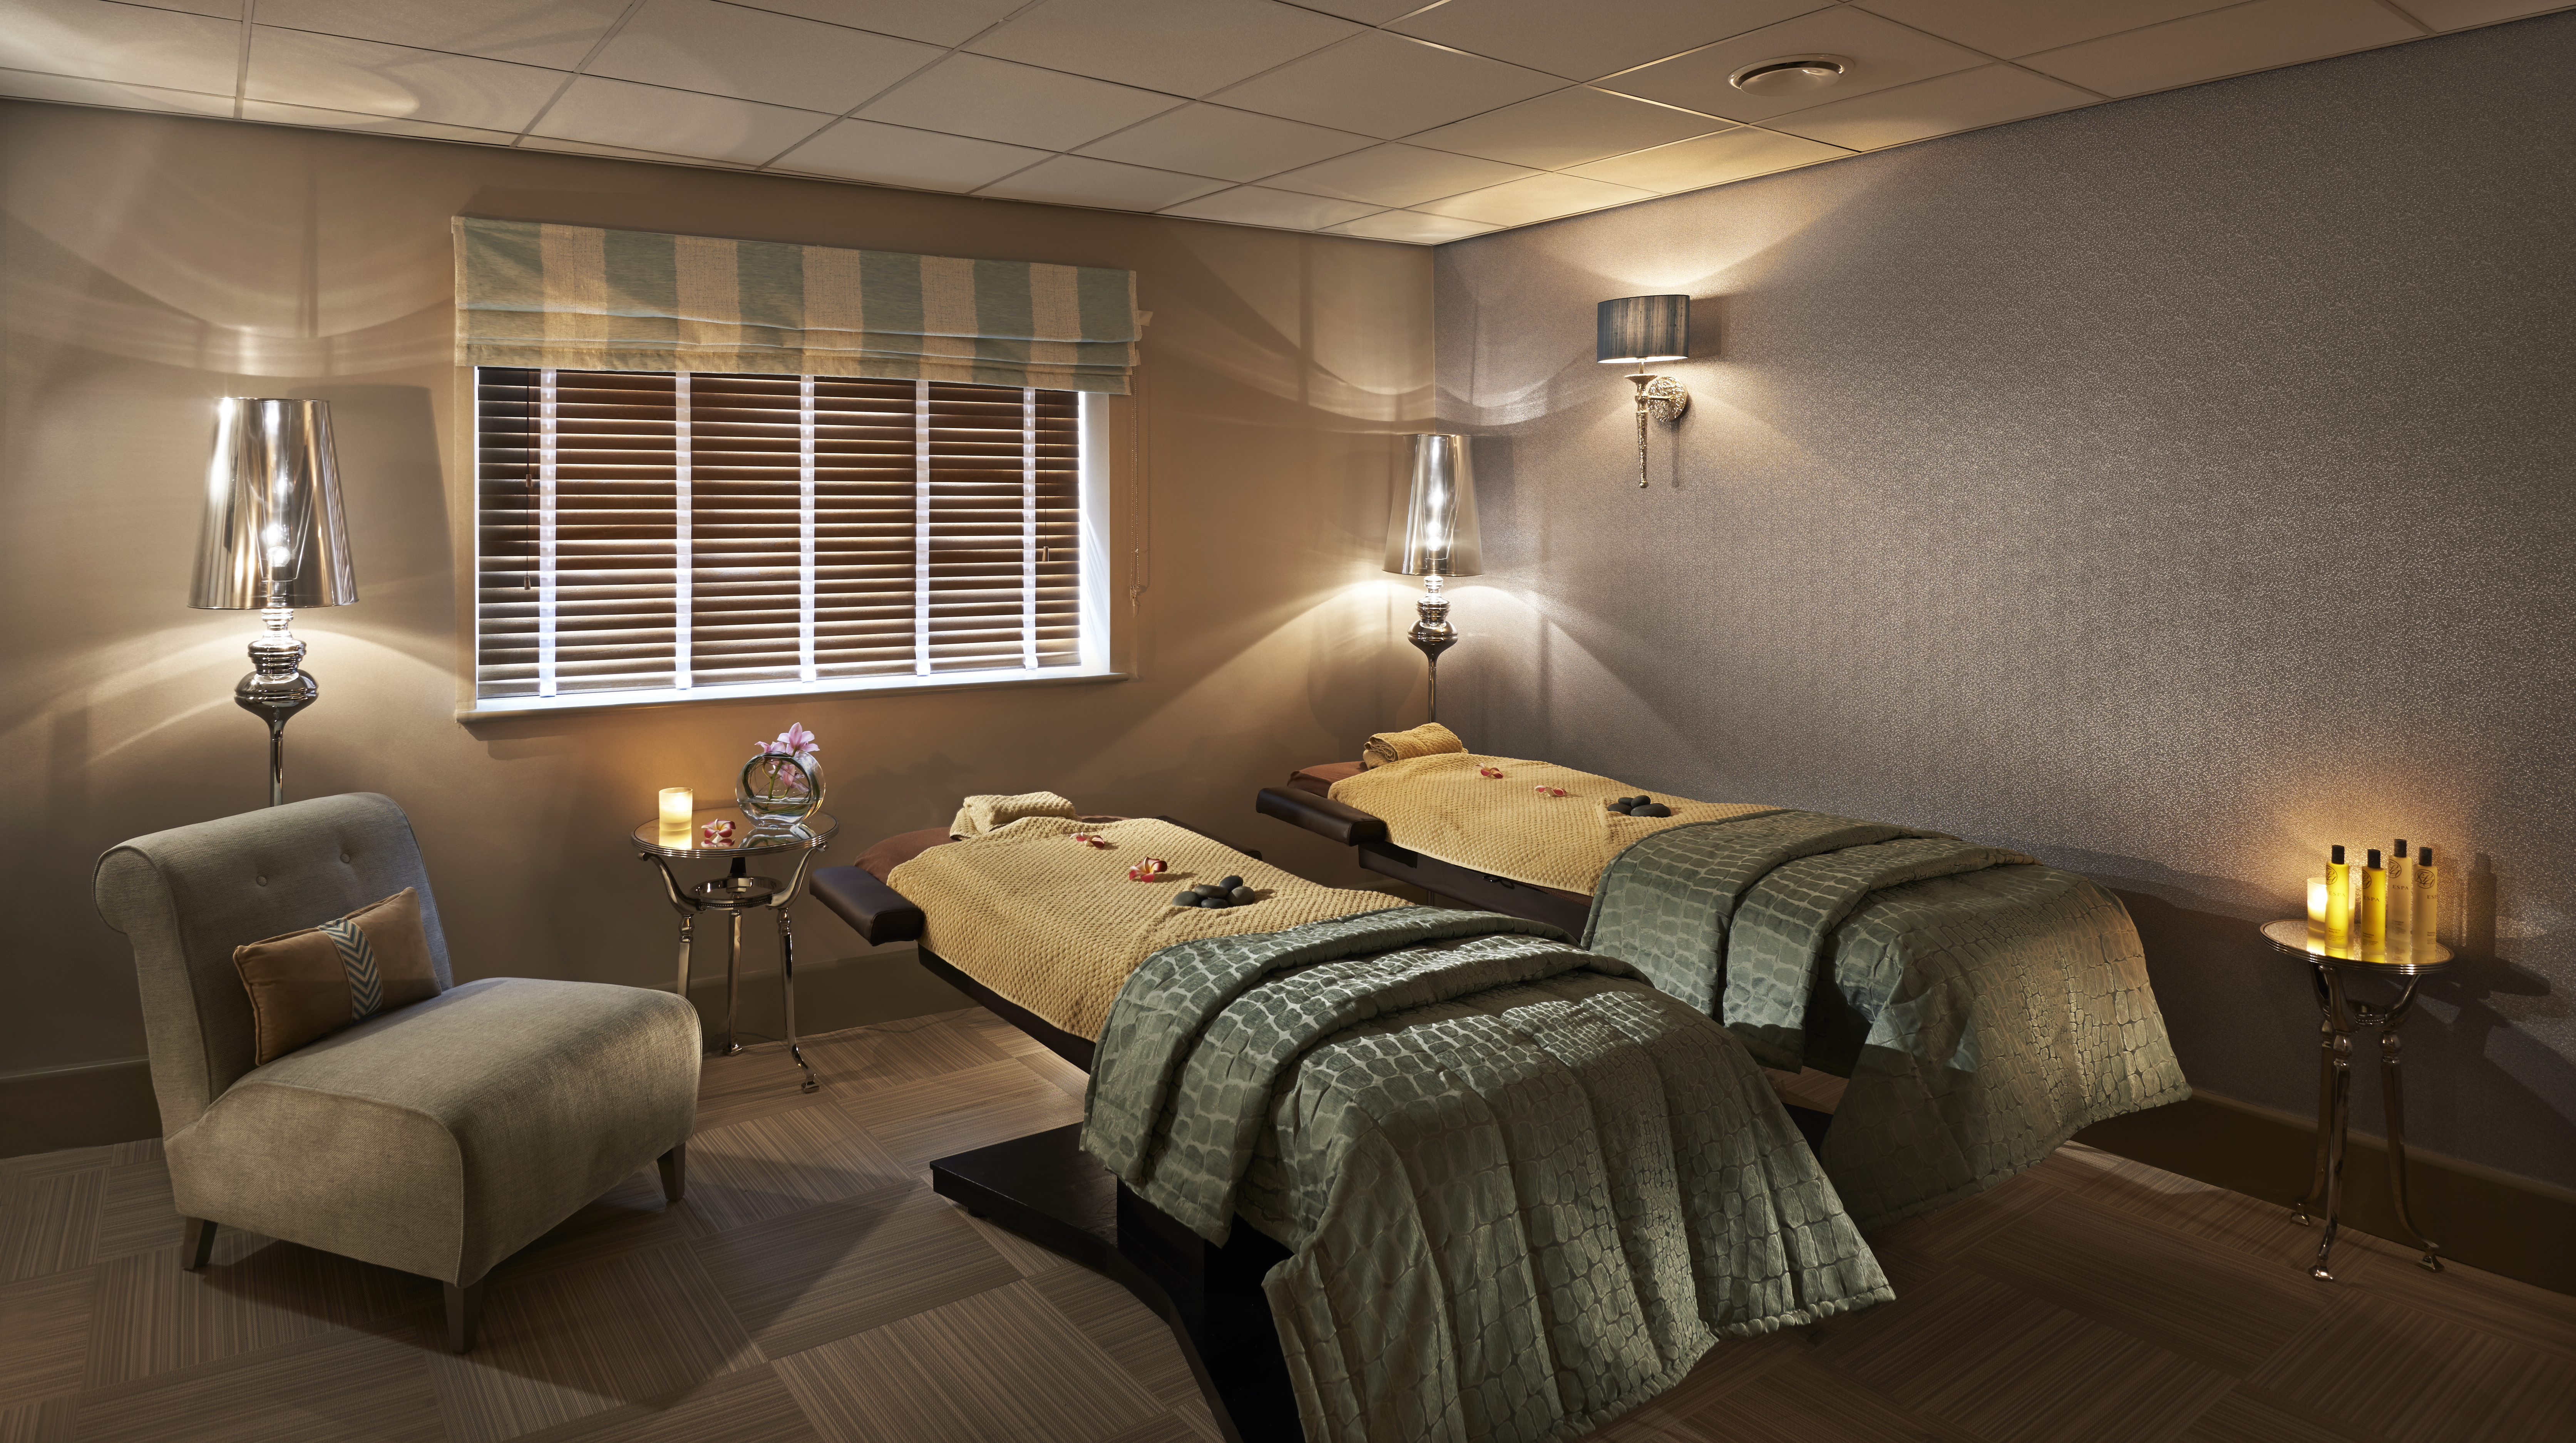 1 Night Radiance Spa Break, The Belfry Hotel And Spa